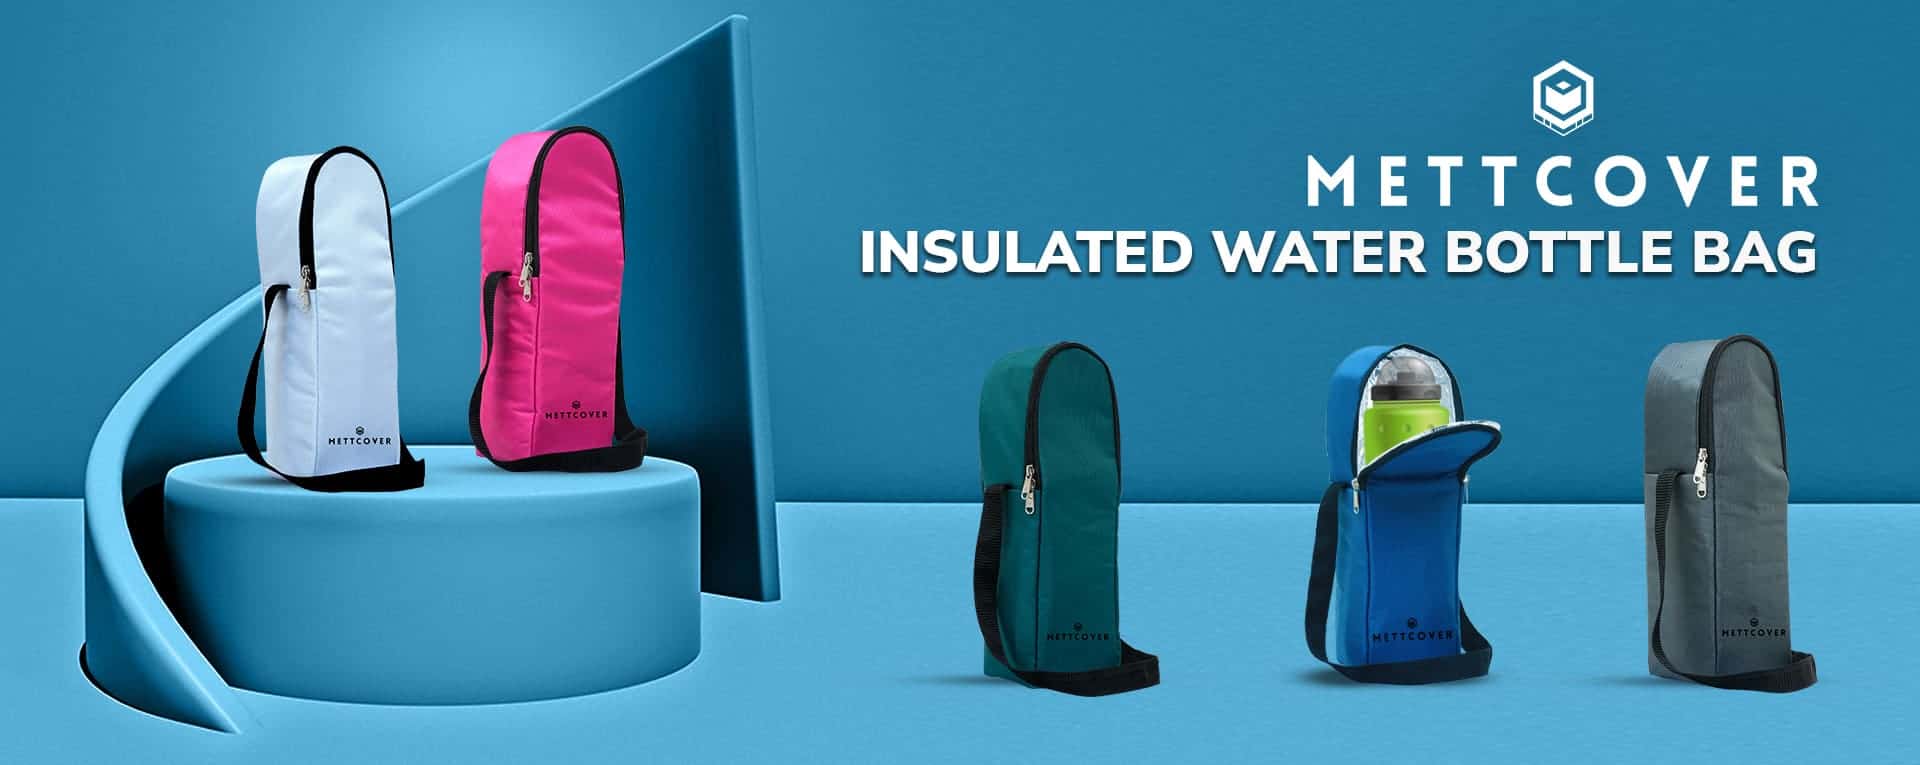 Mettcover Insulated Water Bottle Bag